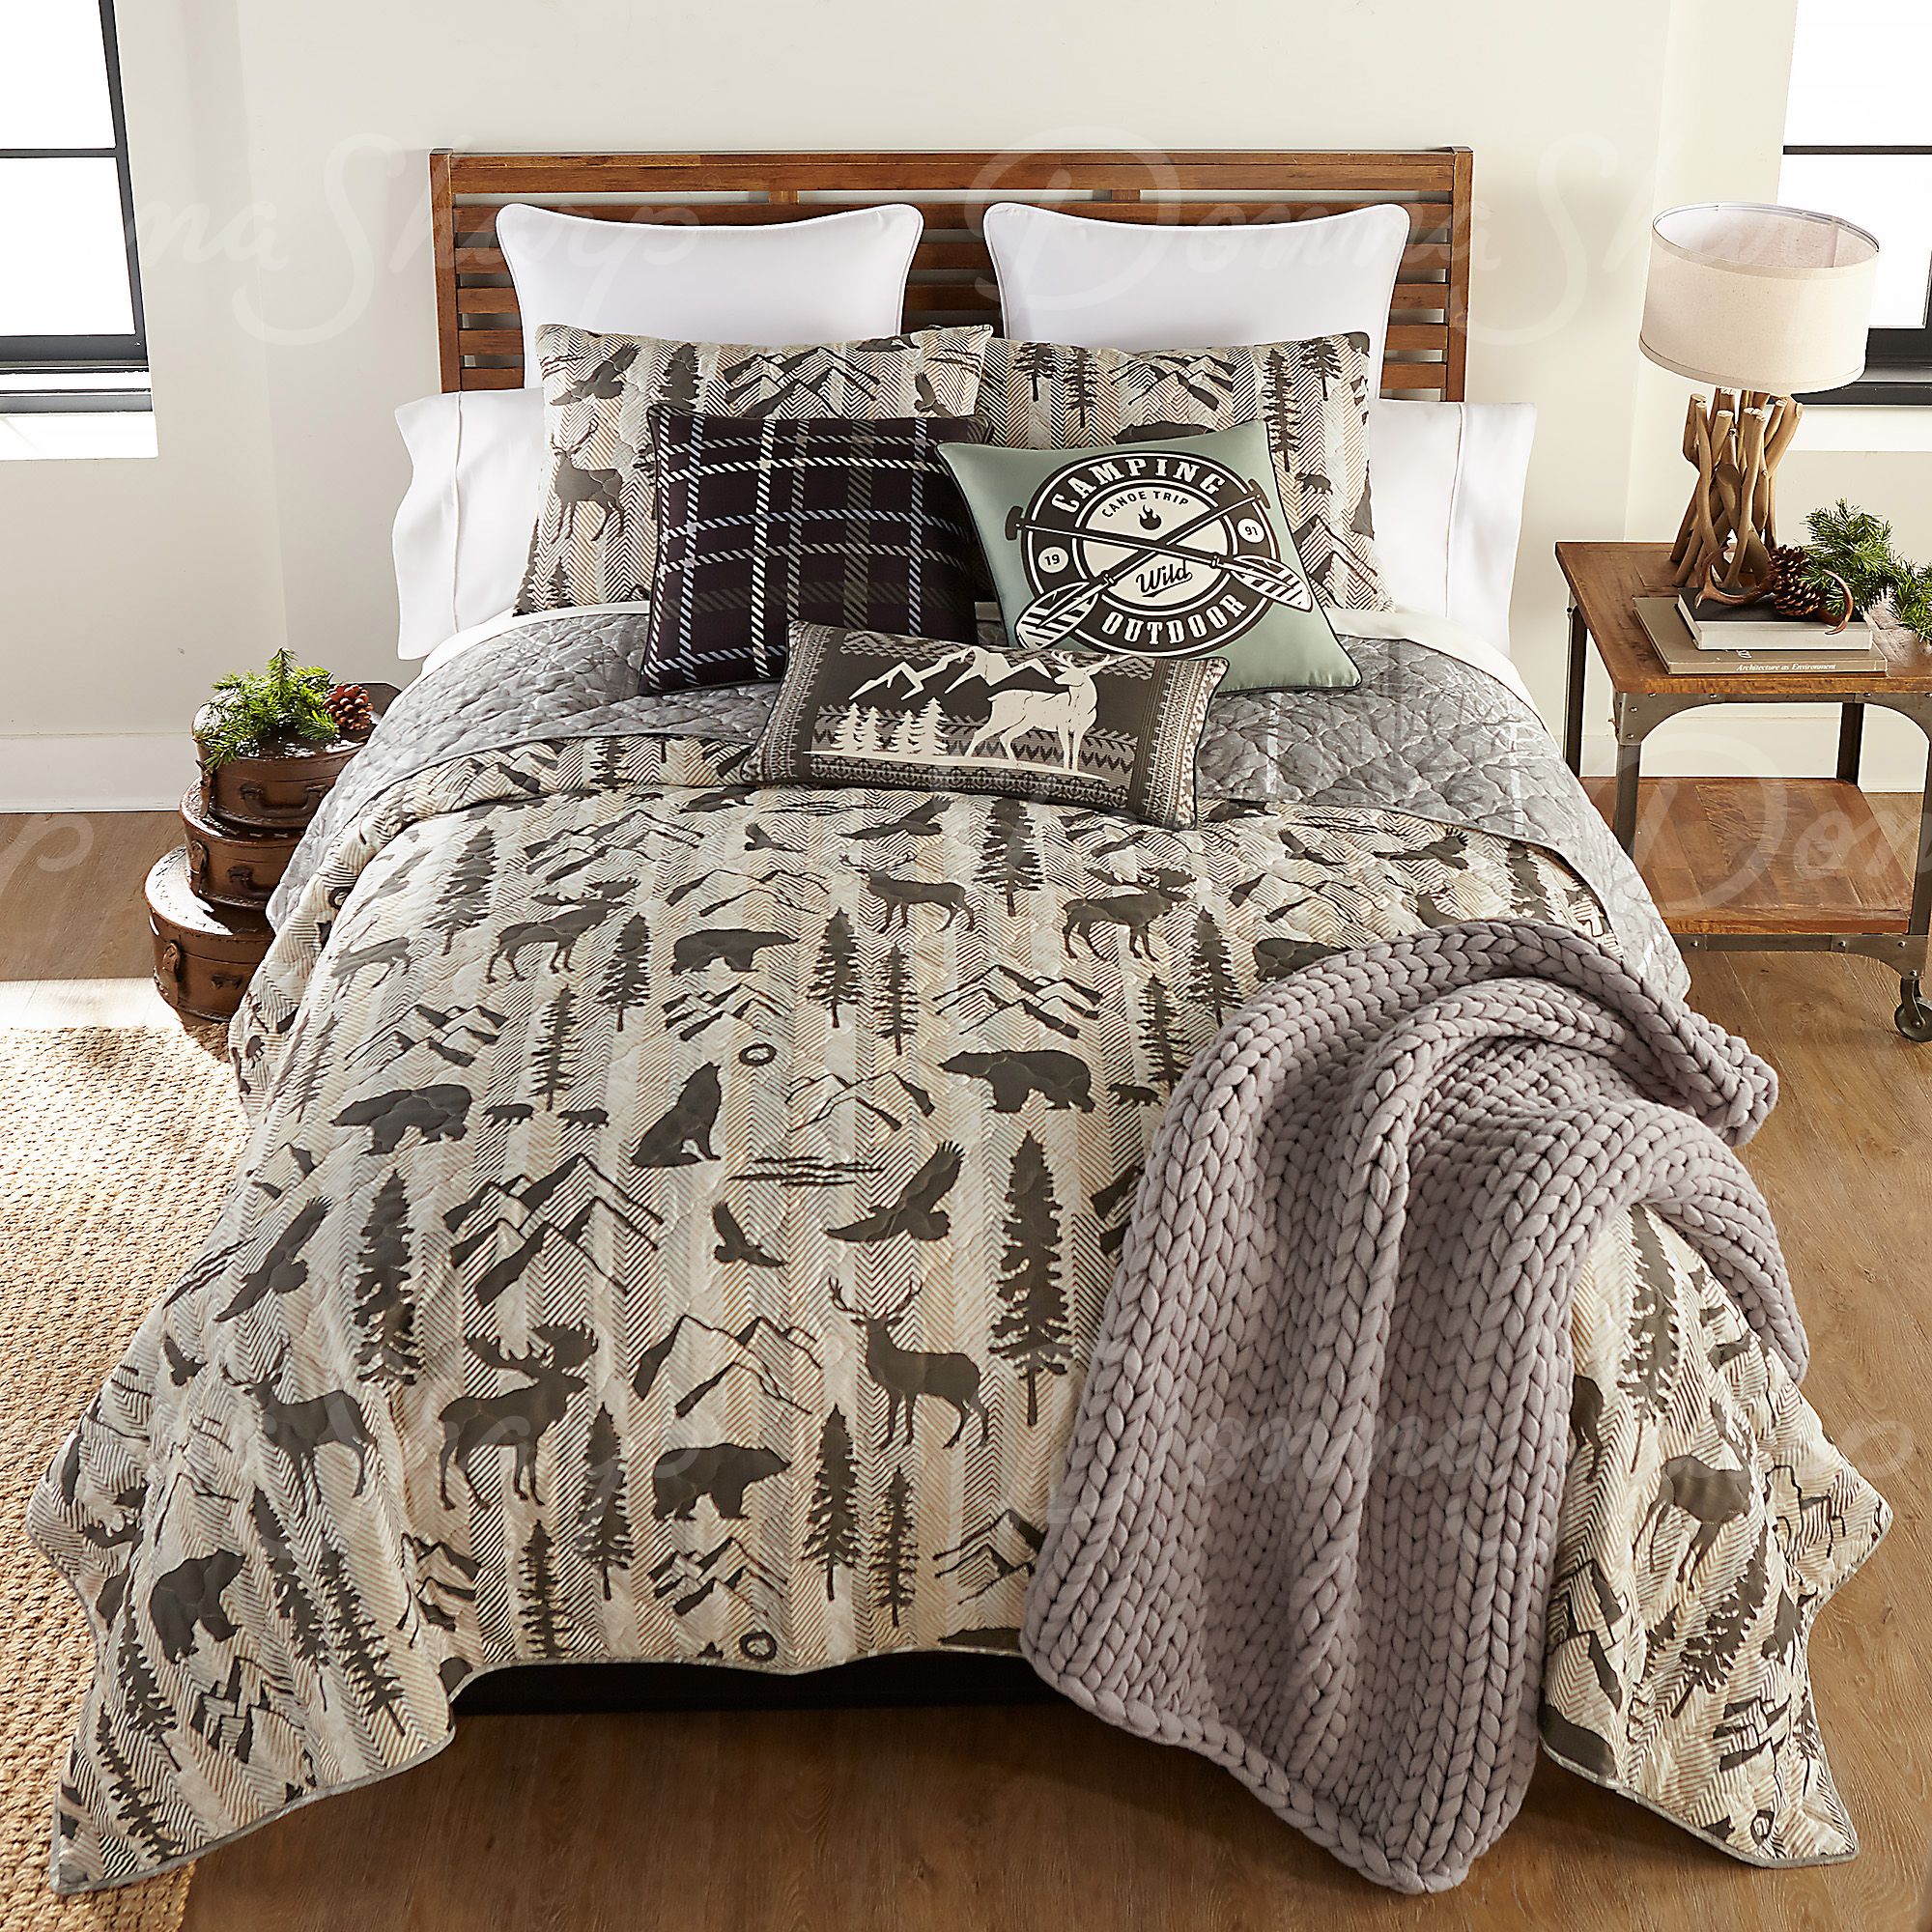 Your Lifestyle by Donna Sharp Forest Weave Quilted Bedding Set